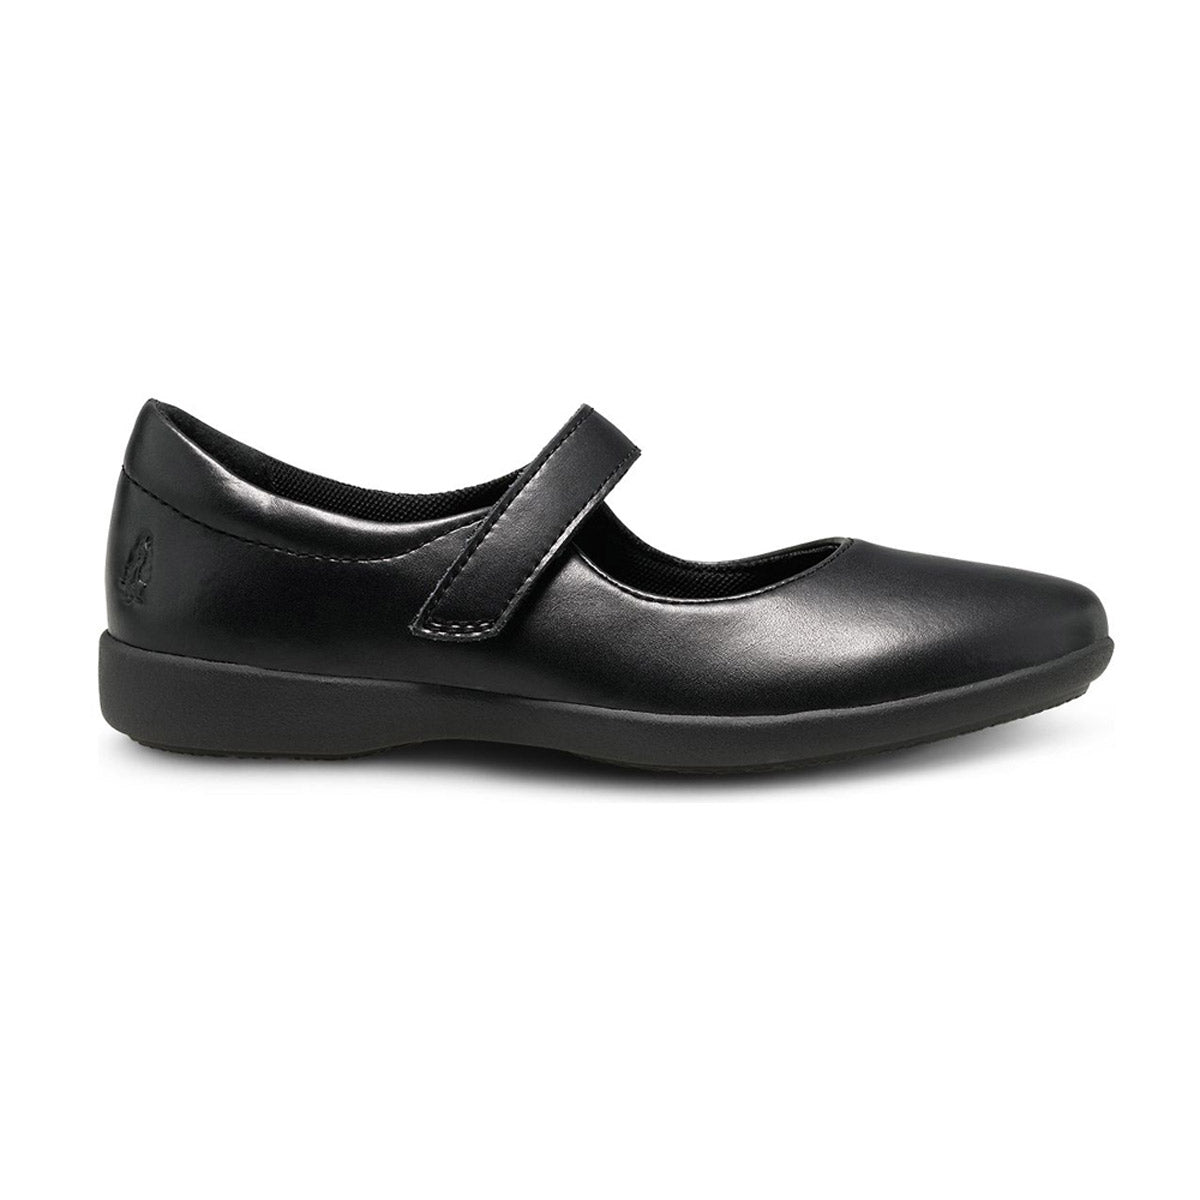 Sentence with replaced product: Black Hush Puppies Lexi leather shoe with velcro strap and memory foam footbed on a white background.